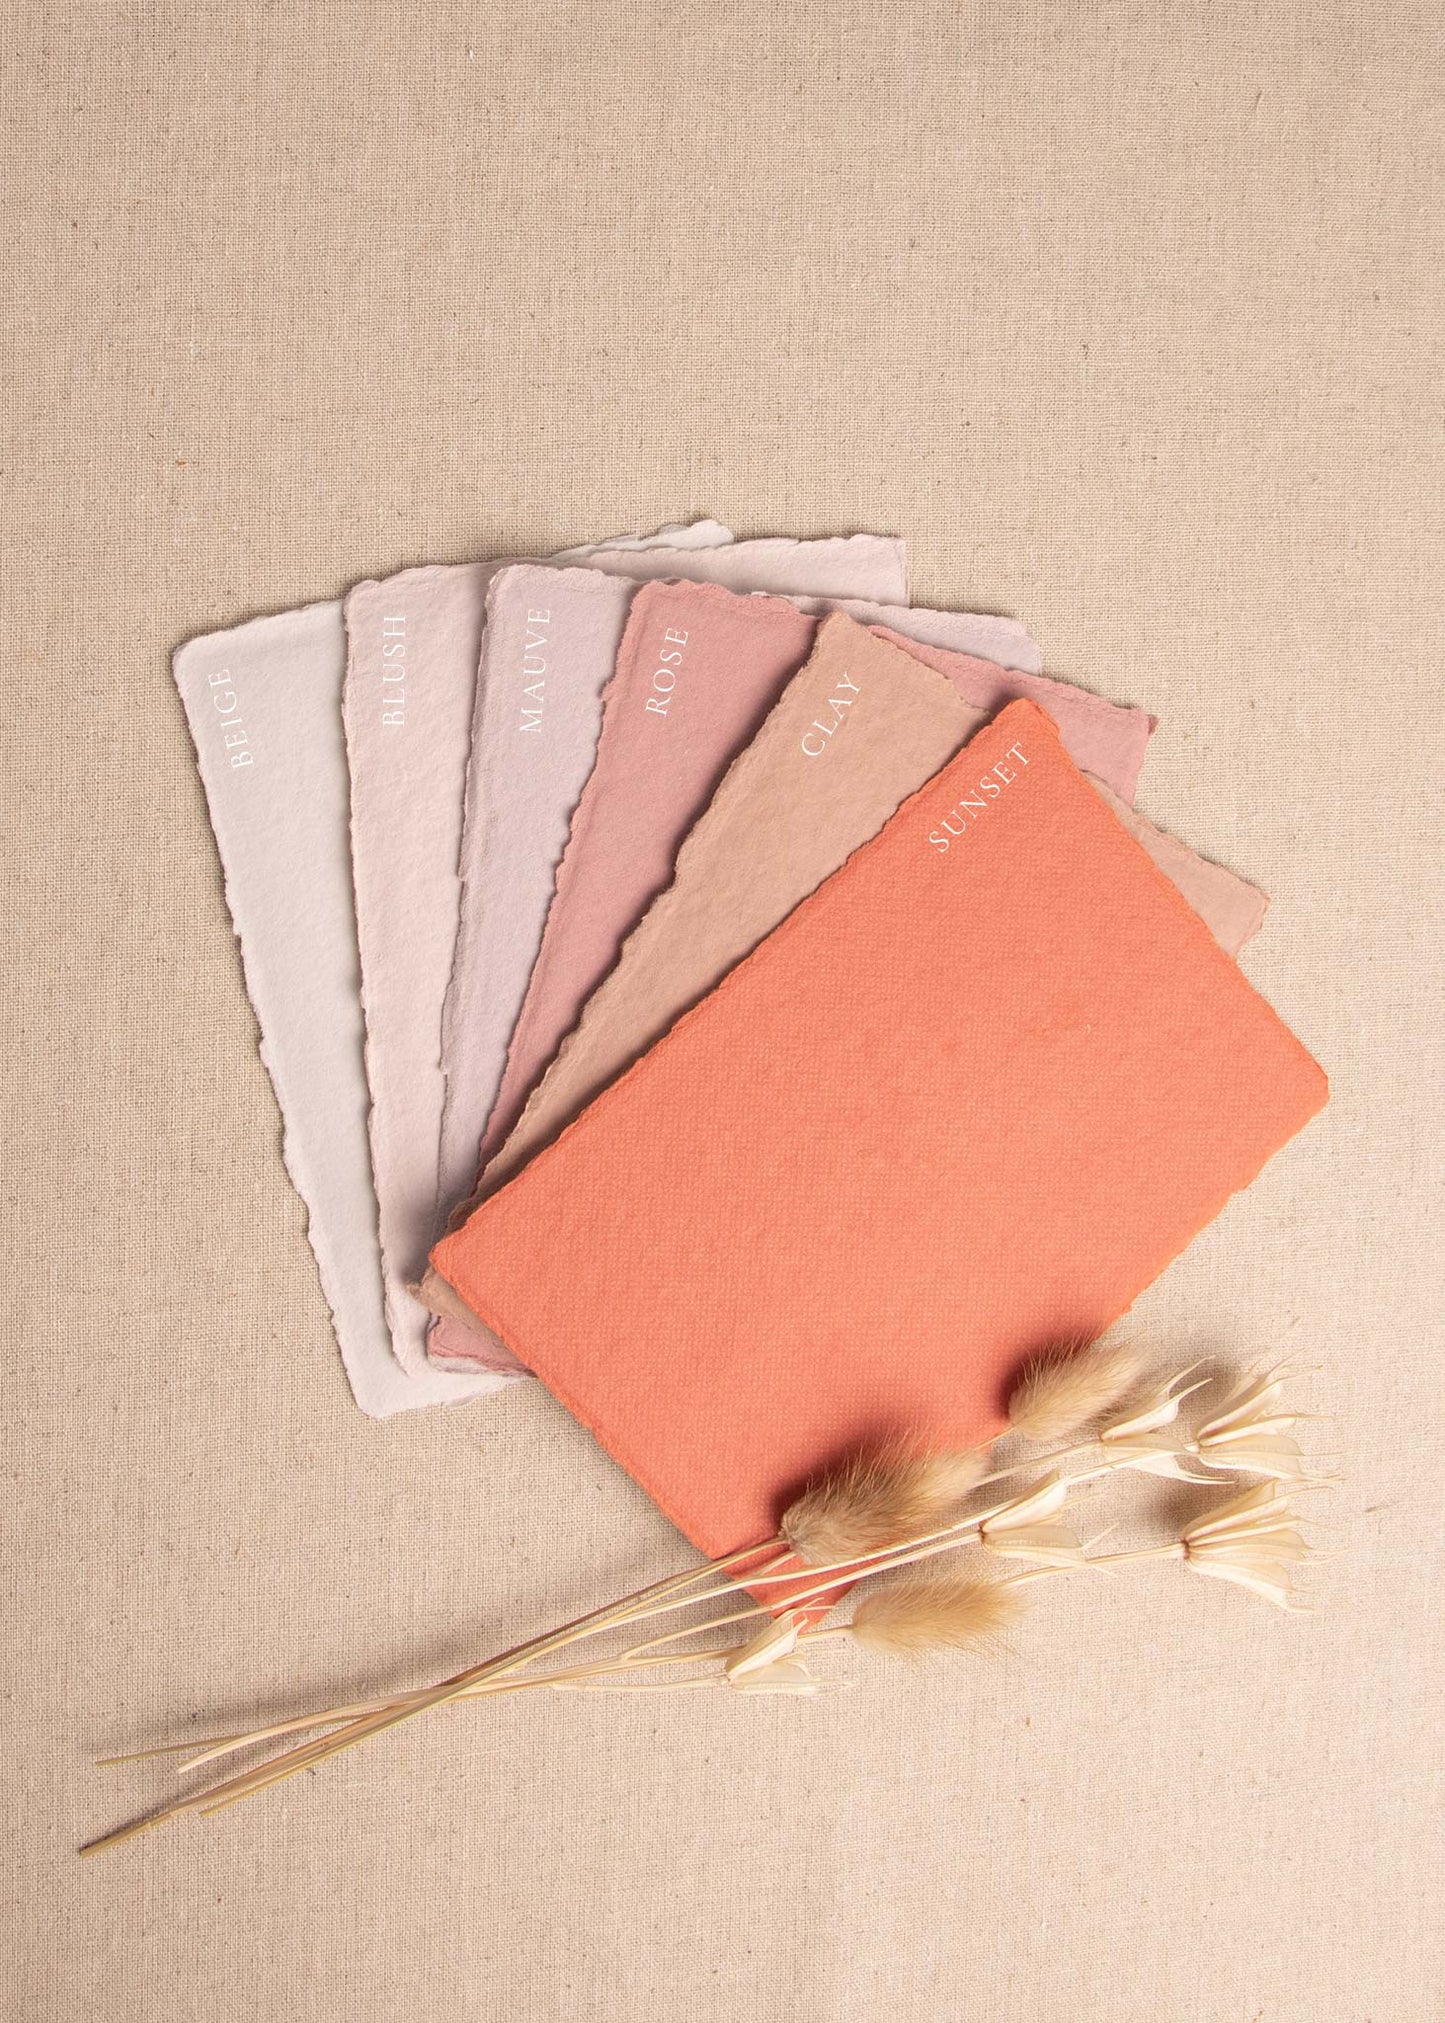 Fanned pile of Beige, Blush, Mauve, Rose, Clay, Sunset handmade paper envelopes with deckle edge surrounded by dried flowers